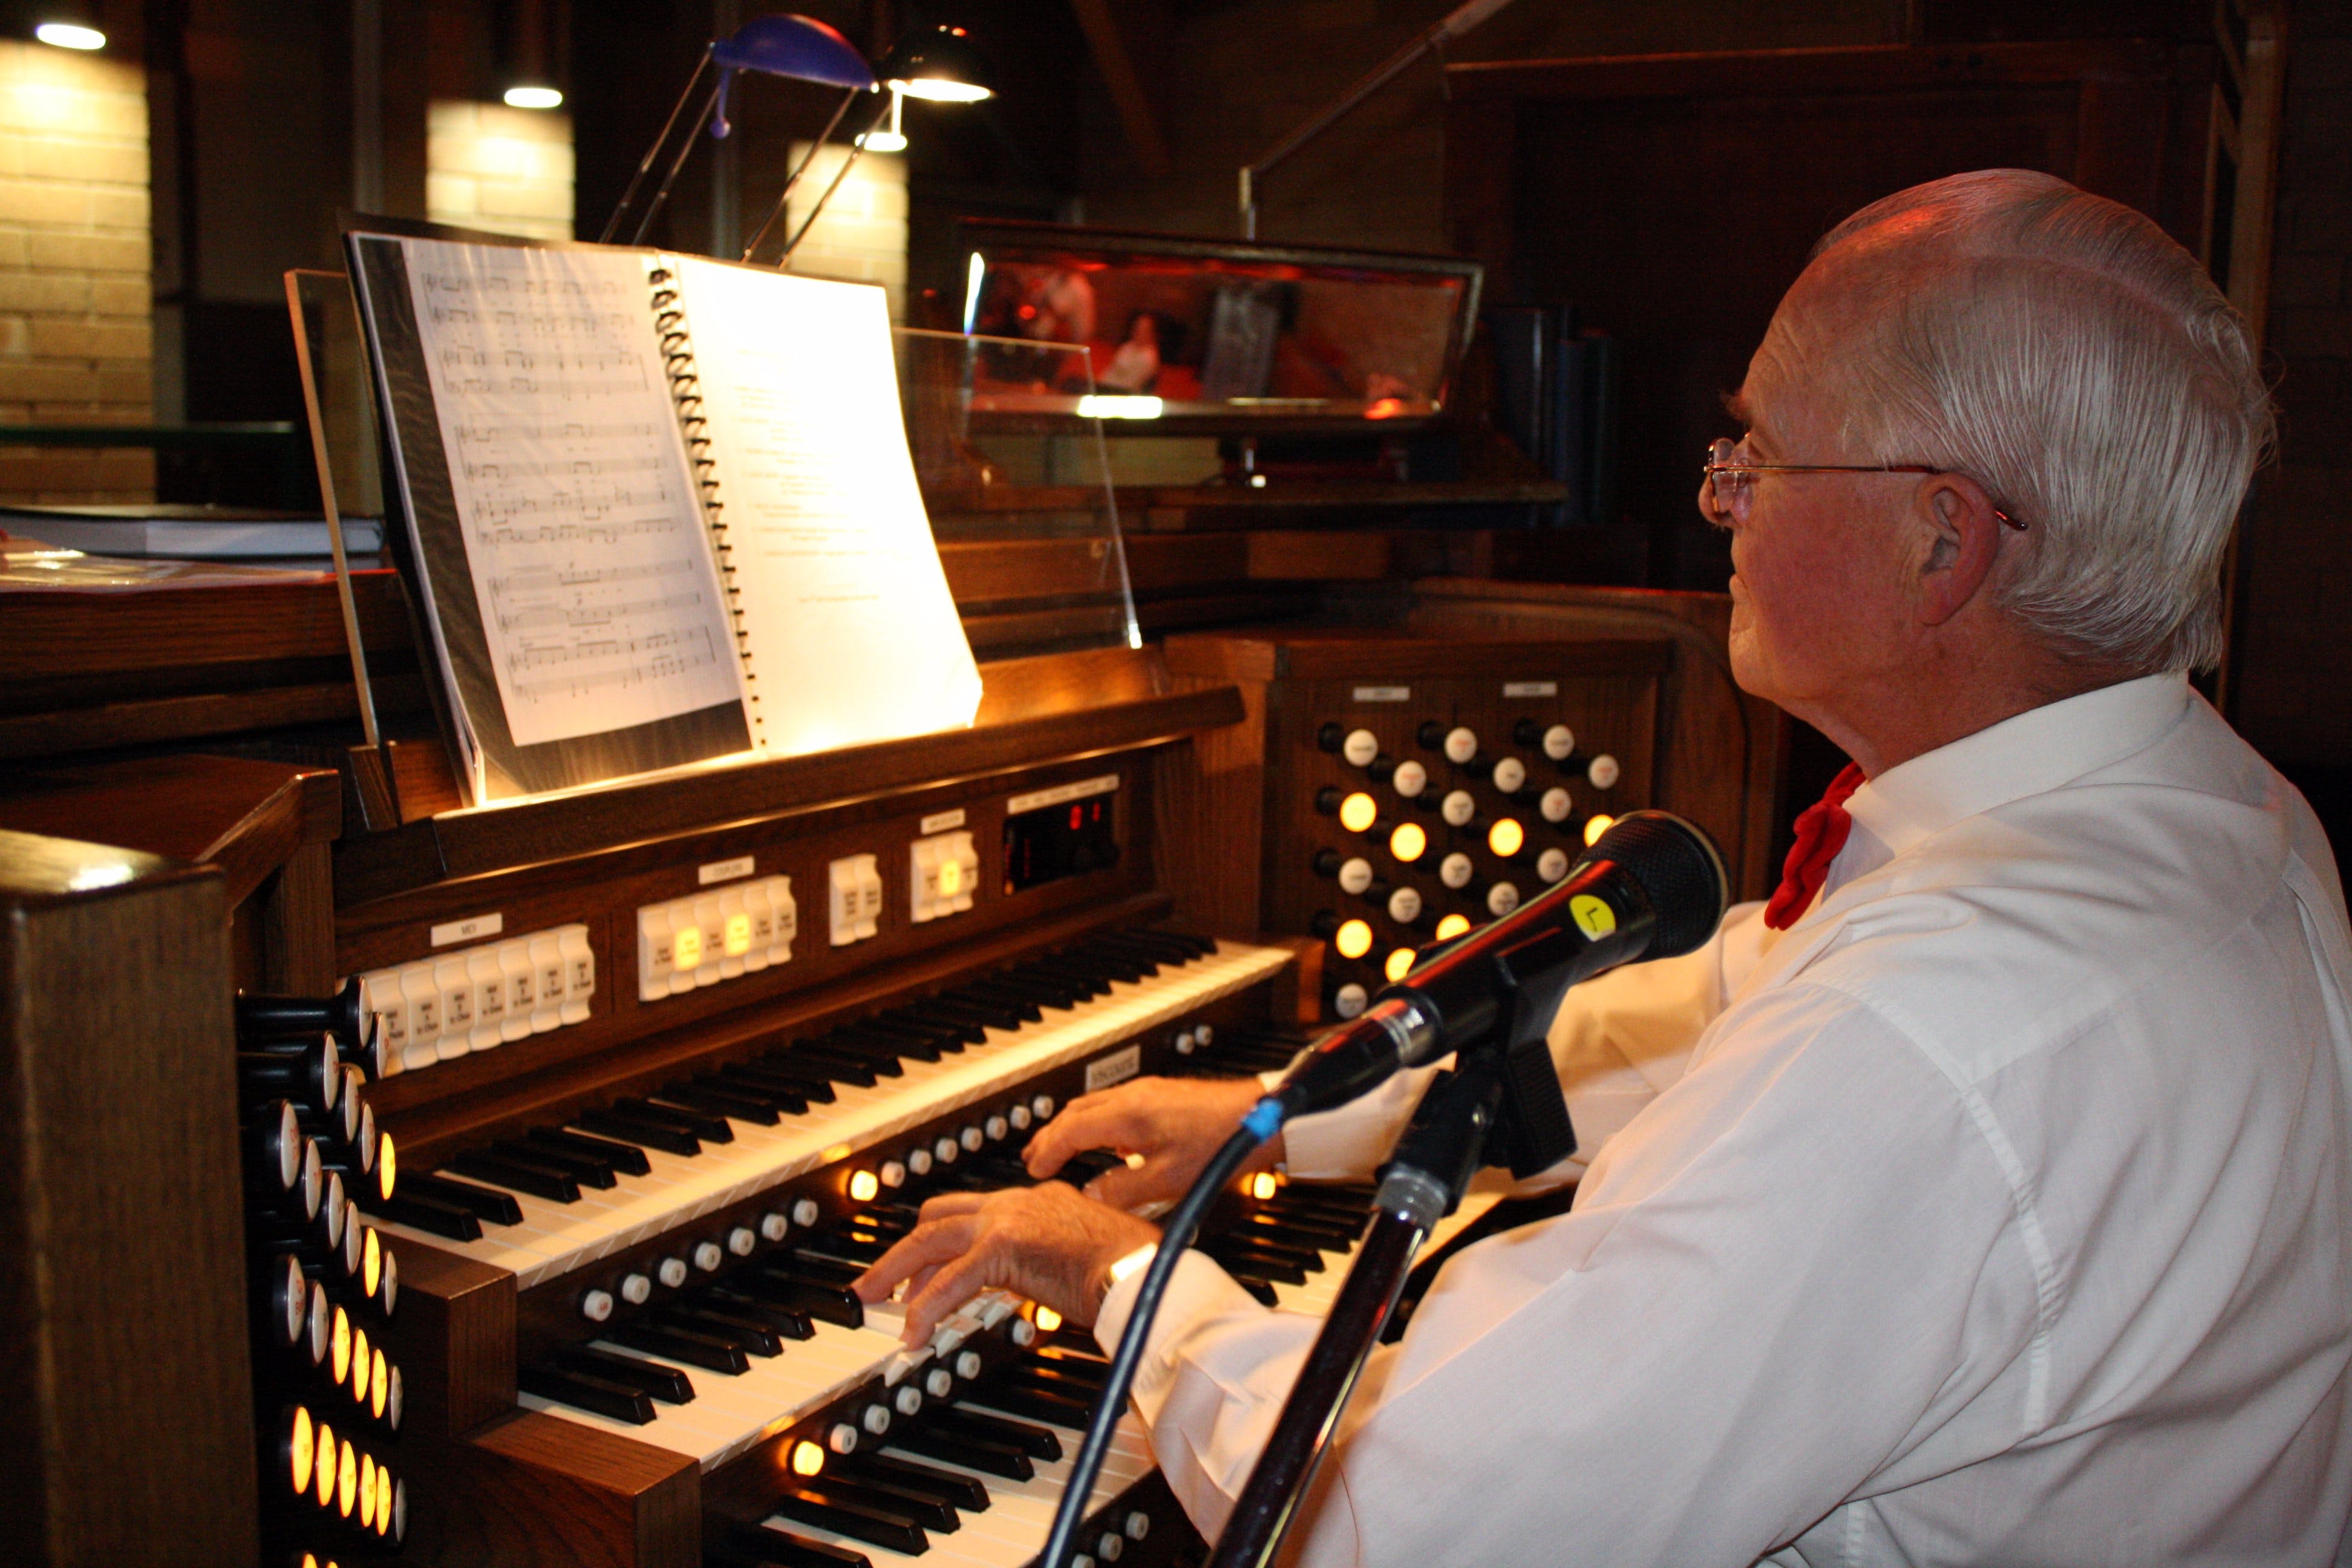 St Bartholomews Largest Digital Pipe Organ in the Southern Hemisphere - Tourism Adelaide